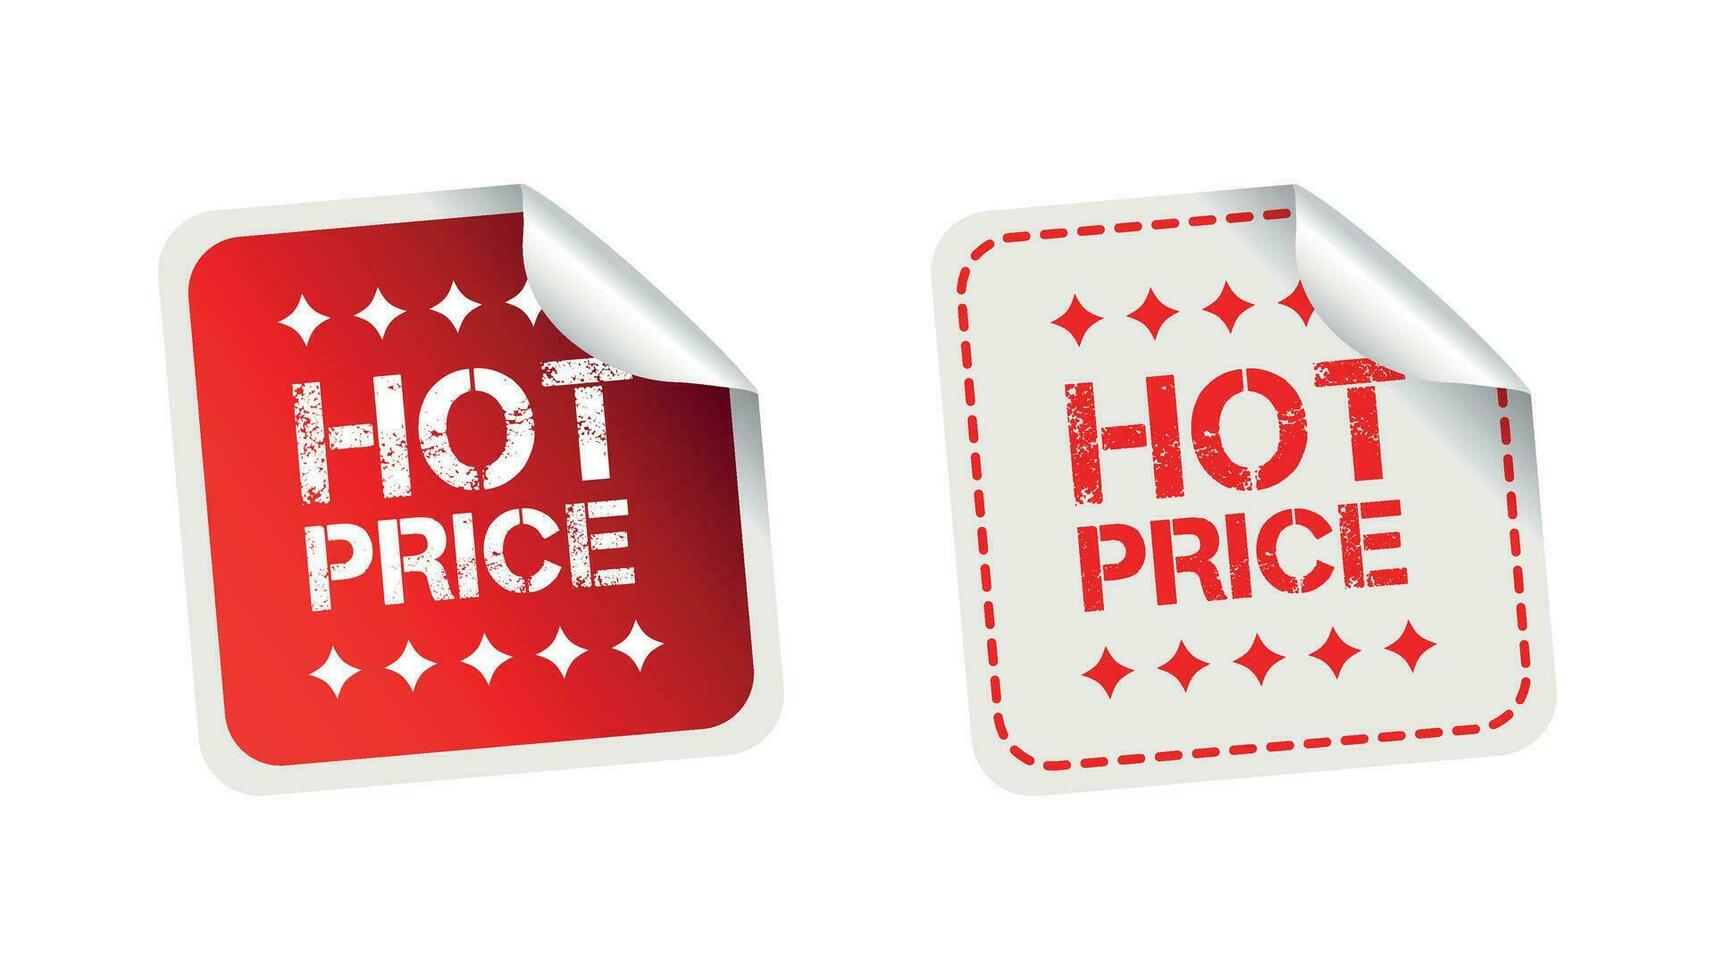 Hot price stickers. Vector illustration on white background.